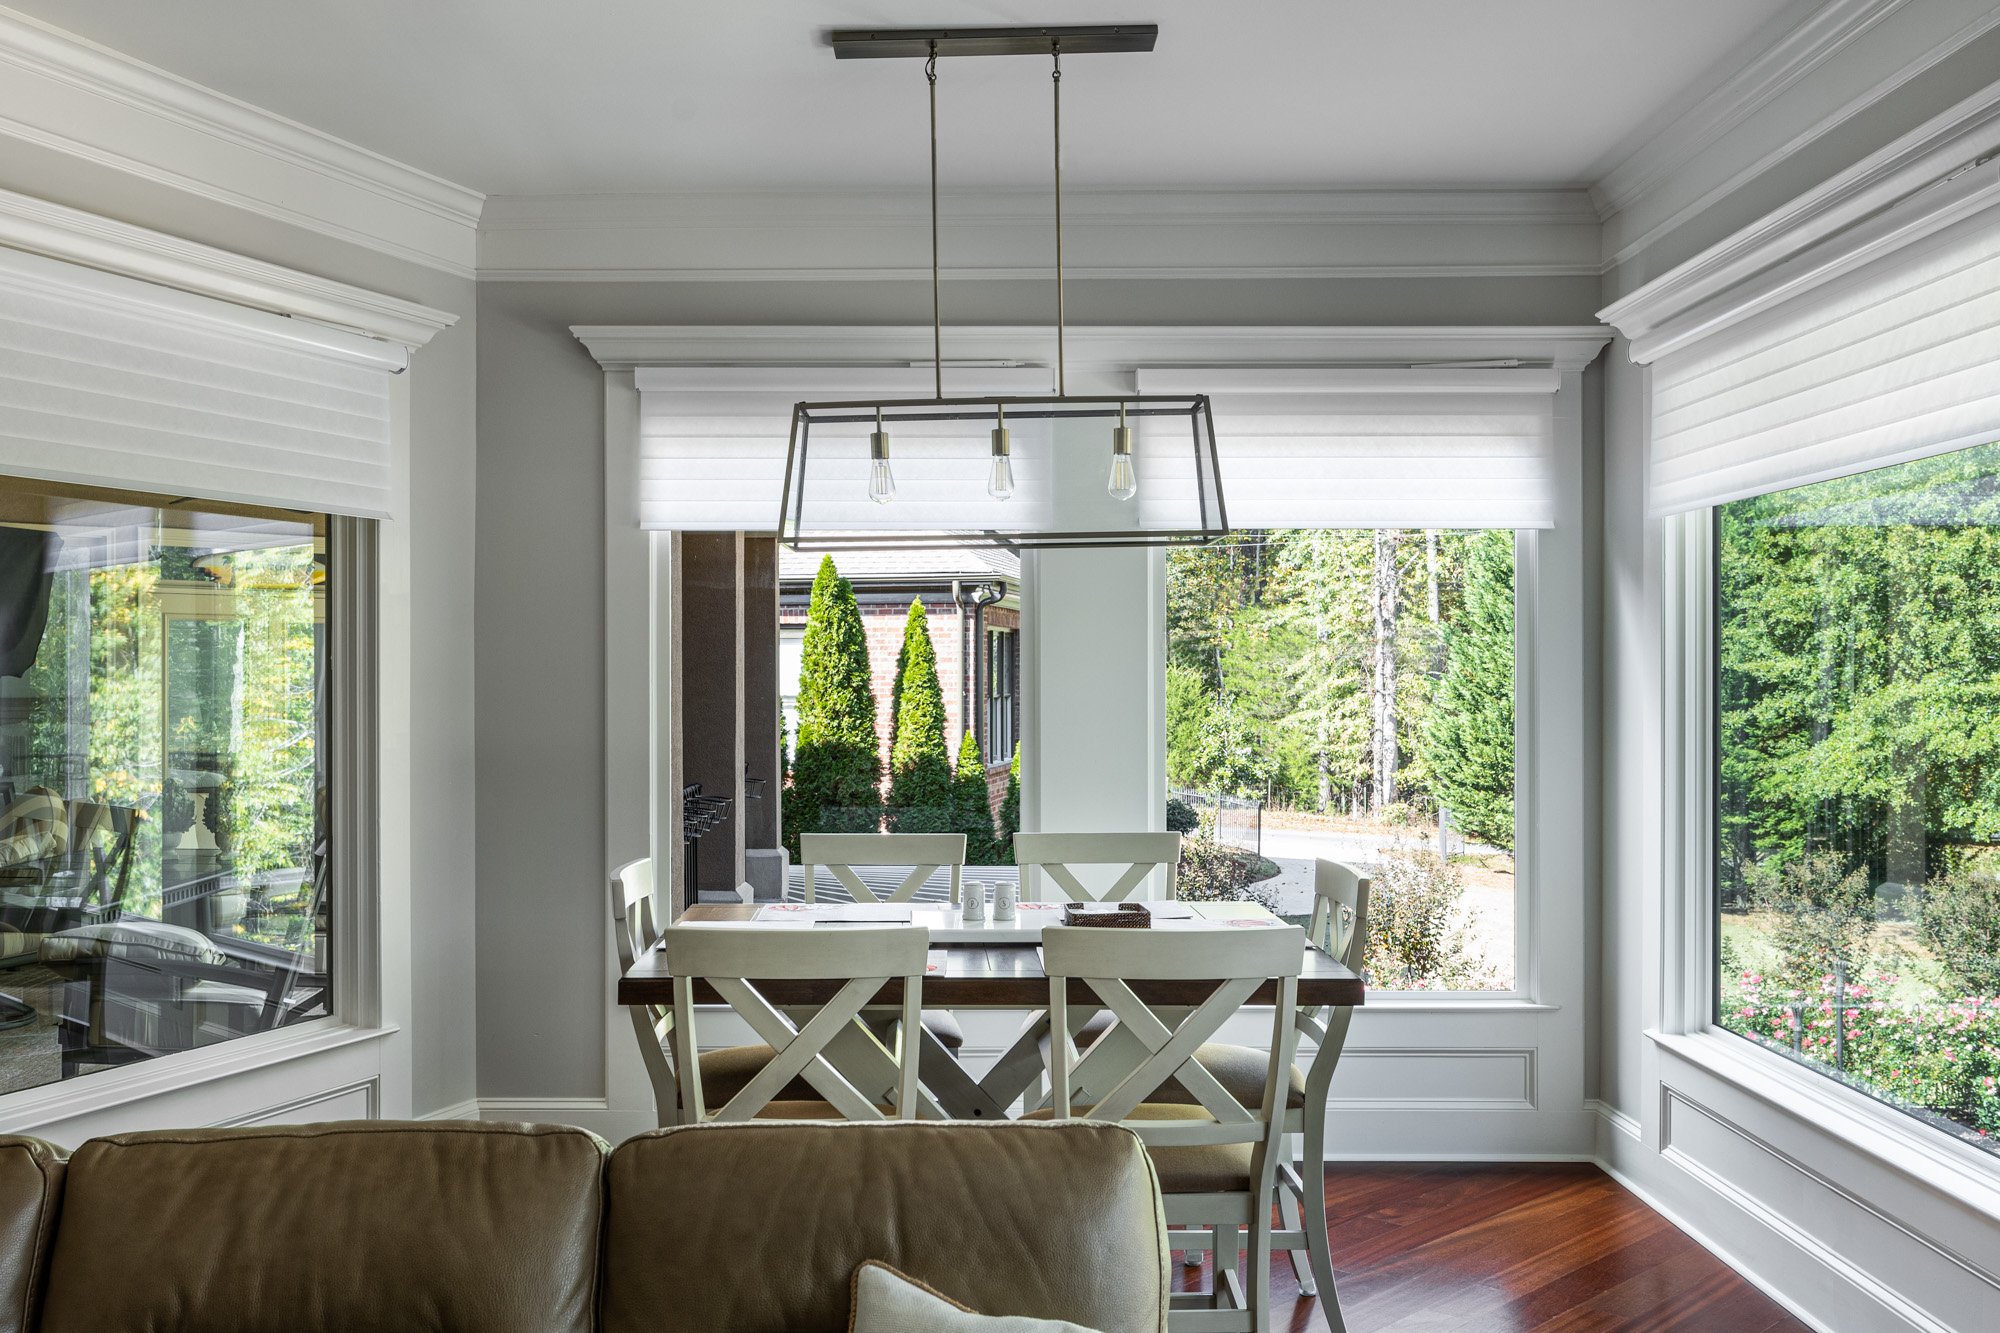 Elegant dining space with view to manicured garden through bay windows and a modern chandelier.